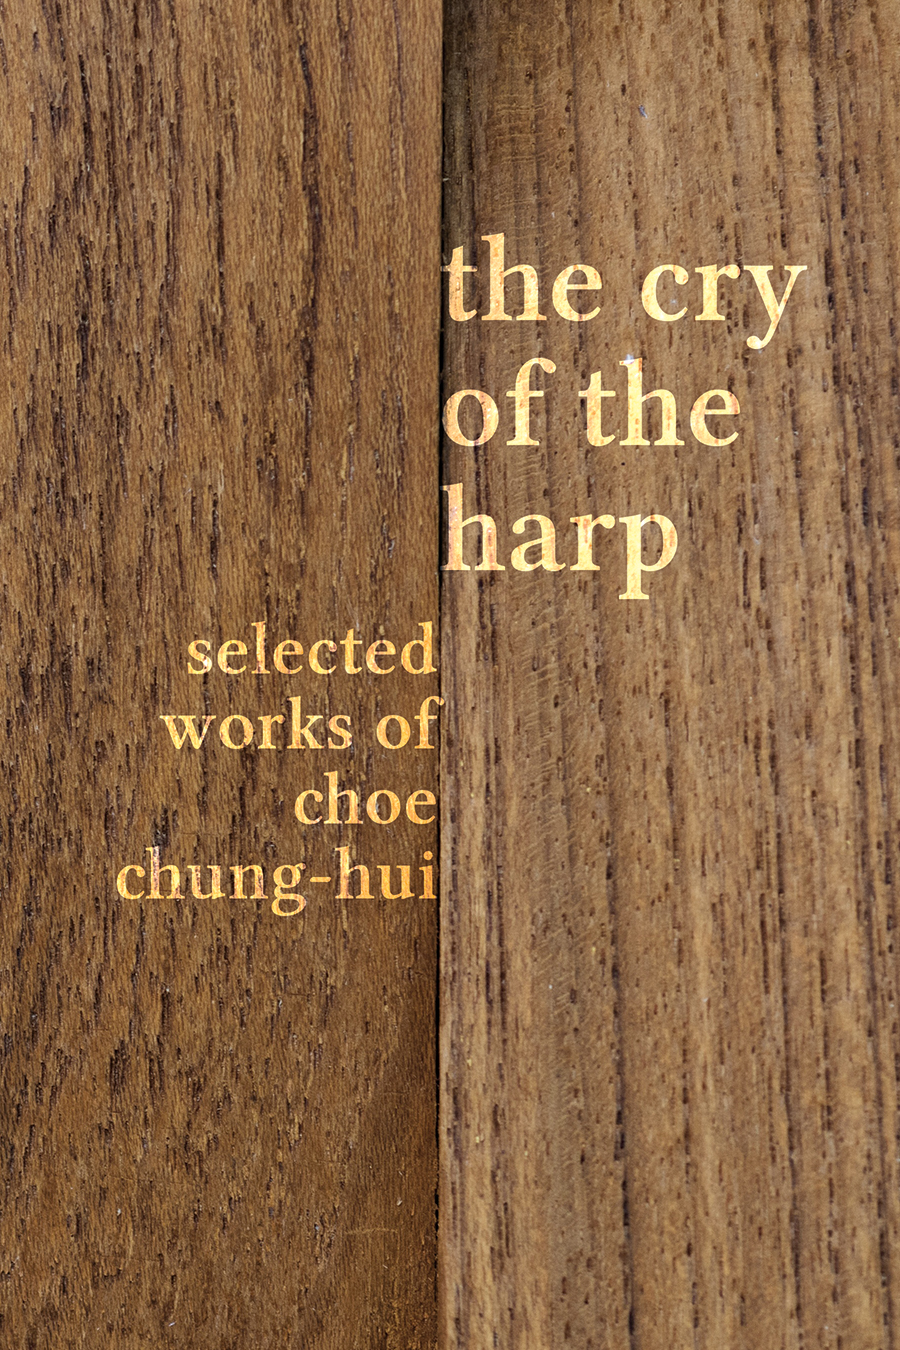 The cover of The Cry of the Harp by Choe Chung-hui